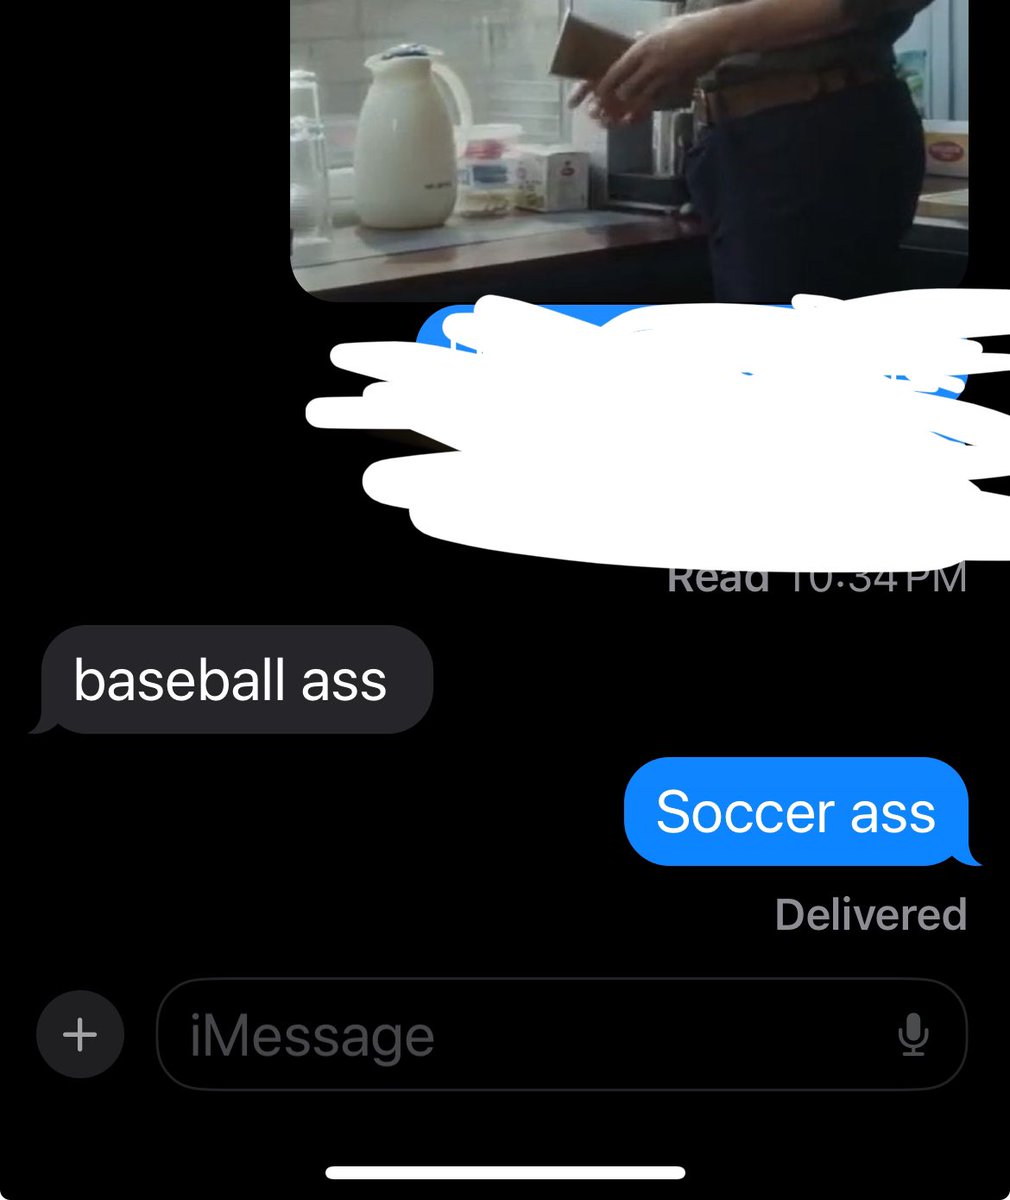 White and a Mexican friend analyzing a man’s phat ass